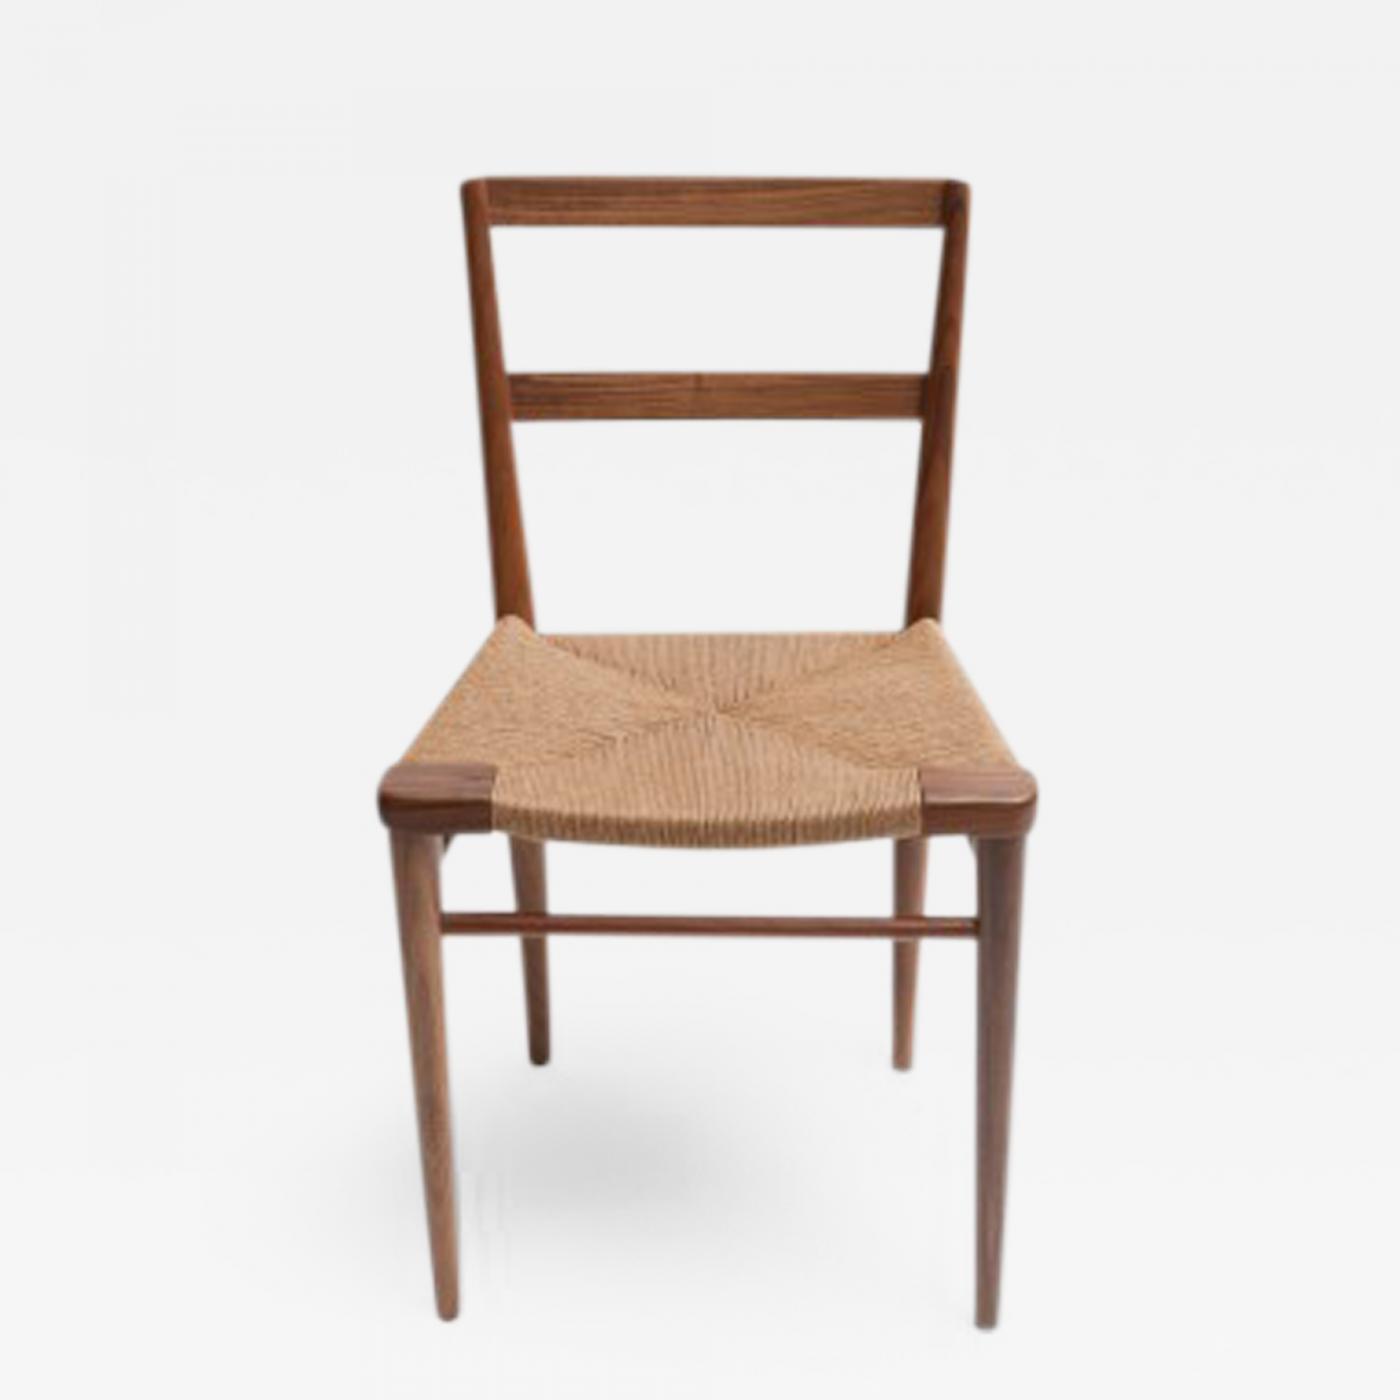 Smilow Furniture Hand Woven Rush Seat Dining Chair By Smilow Furniture